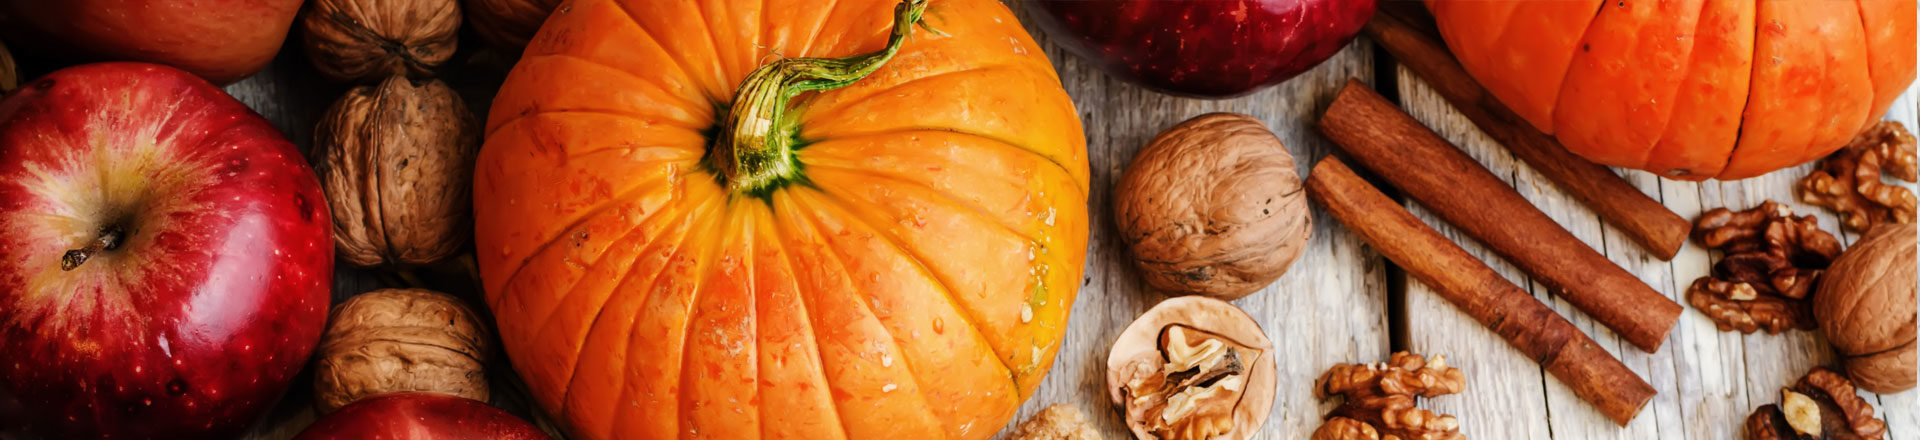 healthy dessert recipes for fall-inspired cooking